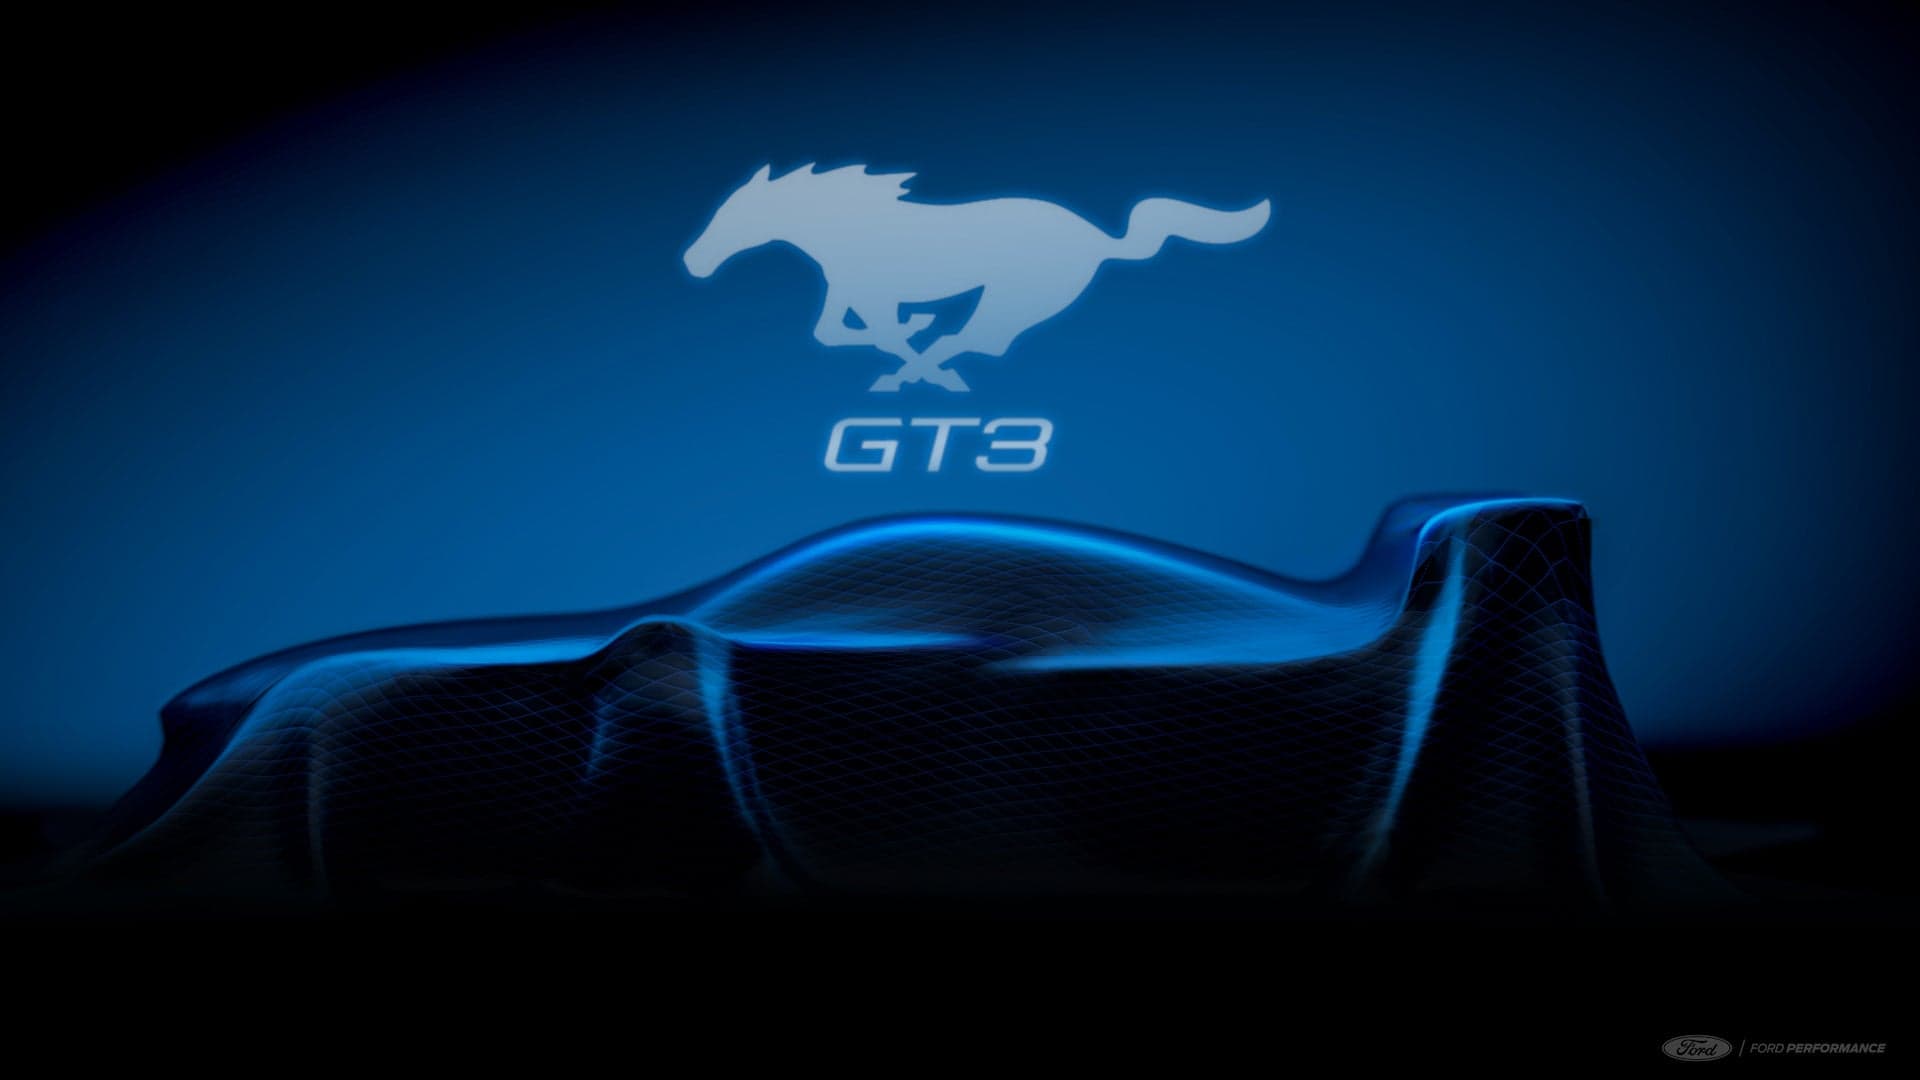 5.0L V8 Ford Mustang GT3 Race Car Will Take on IMSA Corvettes in 2024